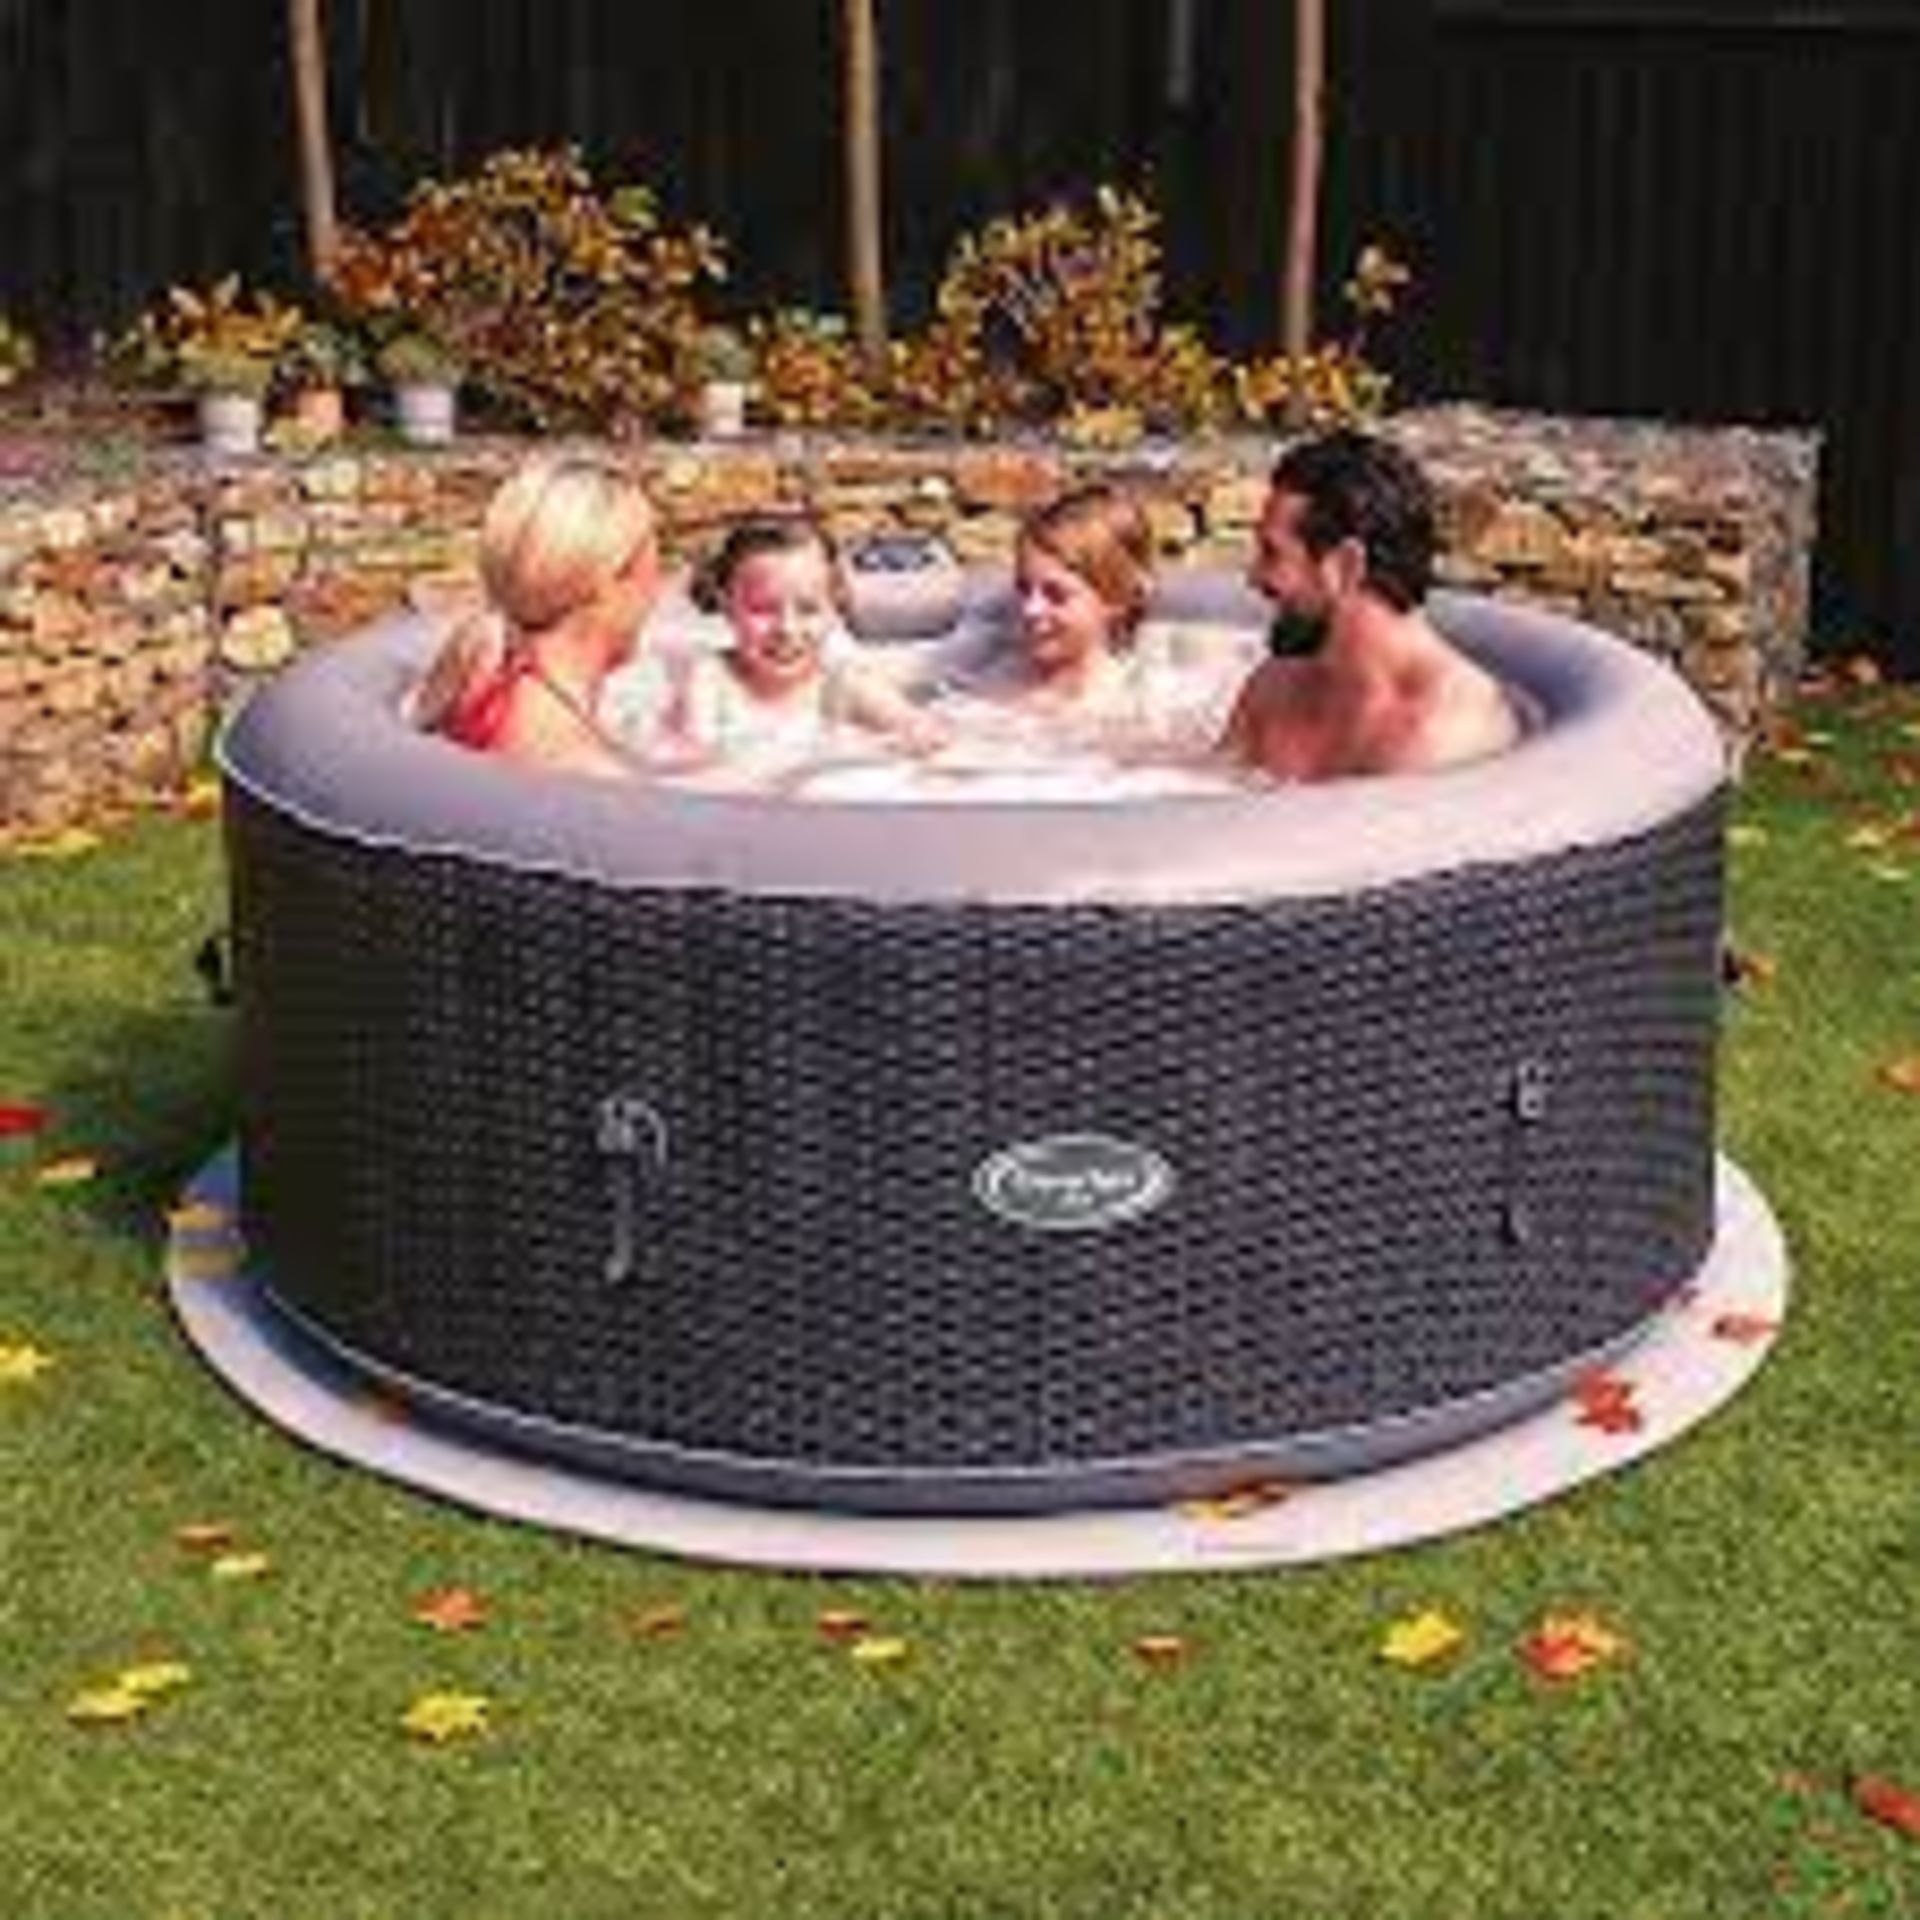 CleverSpa Mia 4 person Hot tub. - ER45. A great way to get into the spa lifestyle if you’ve never